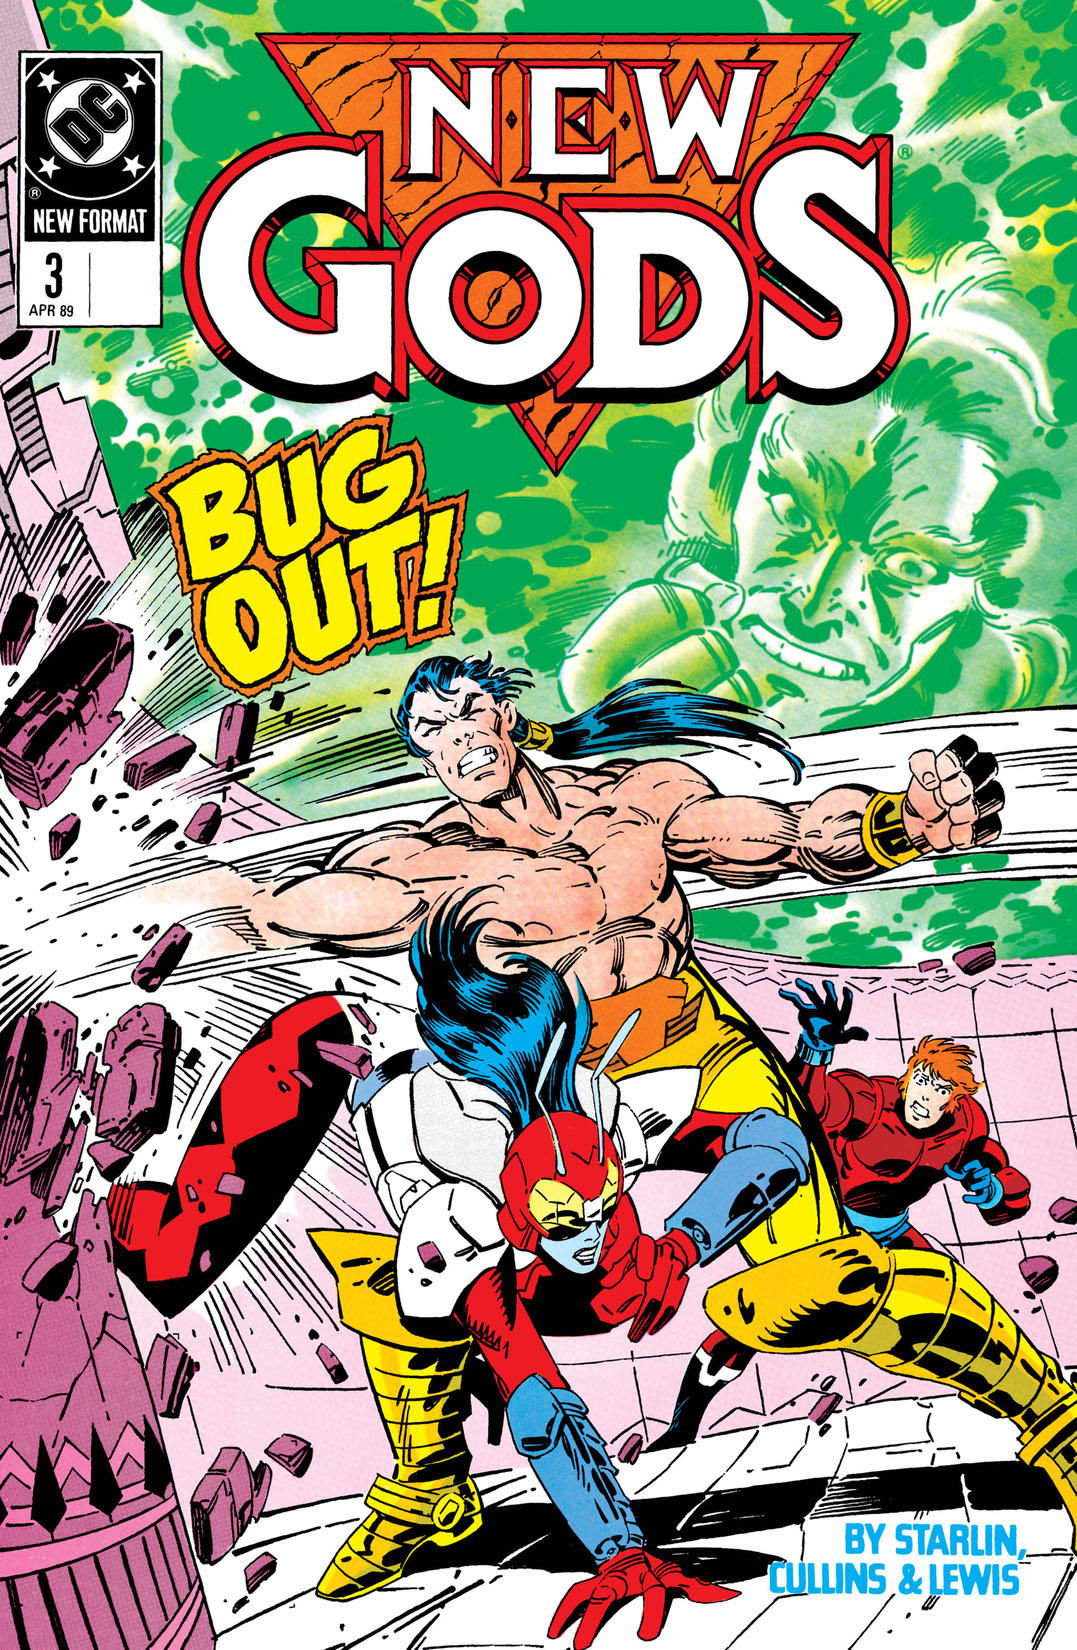 New Gods (1989-) #3 preview images